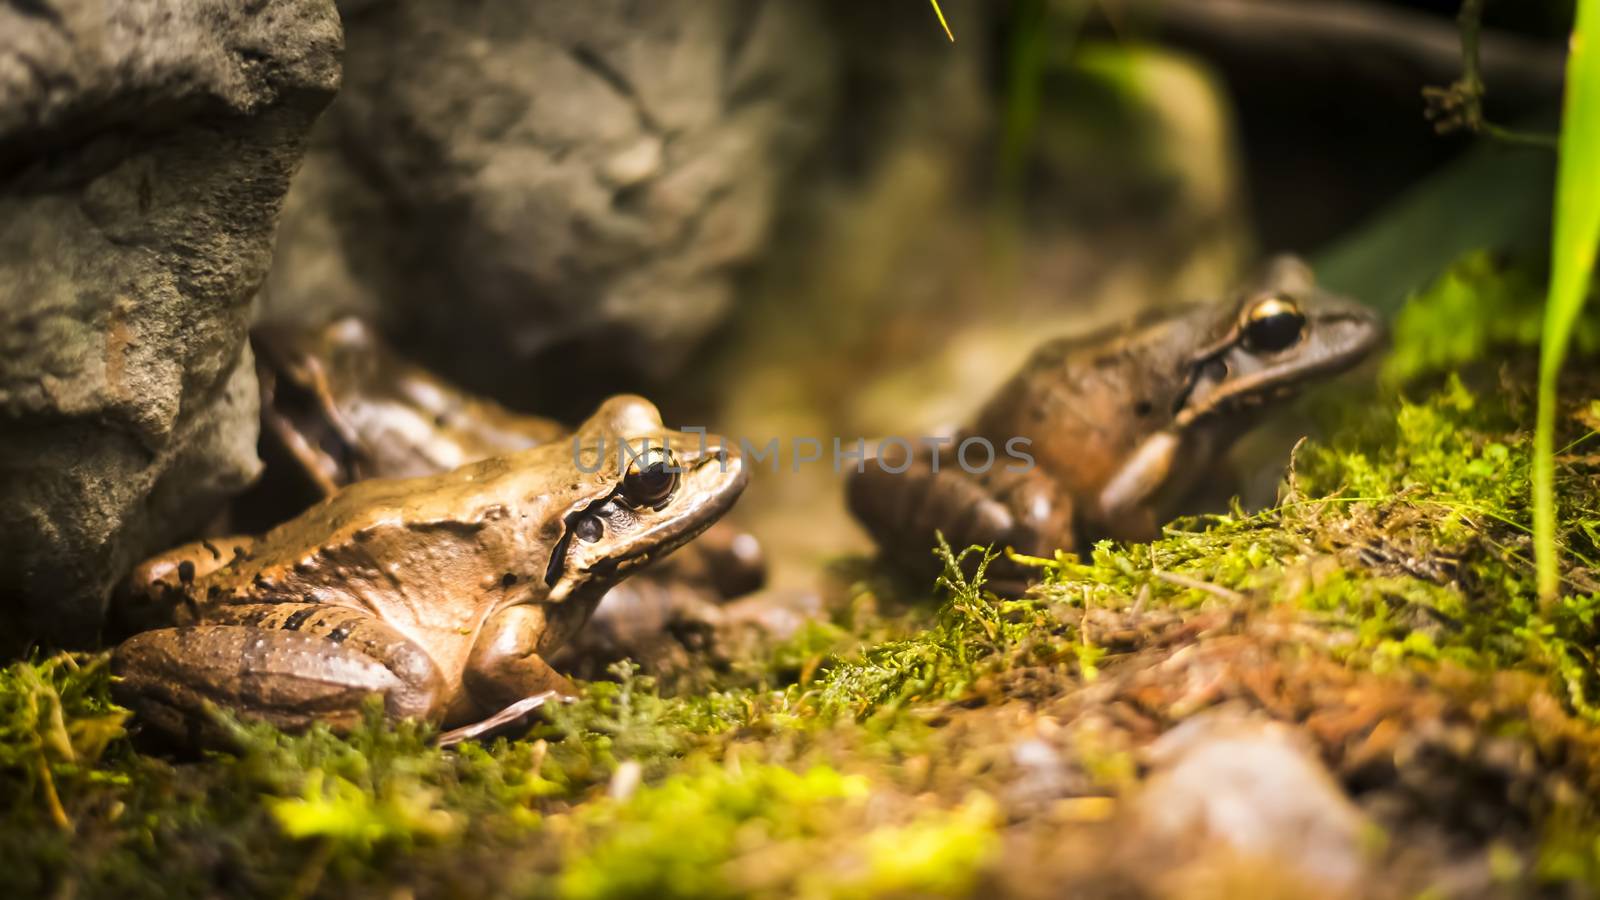 Frogs in tropical forest by furzyk73